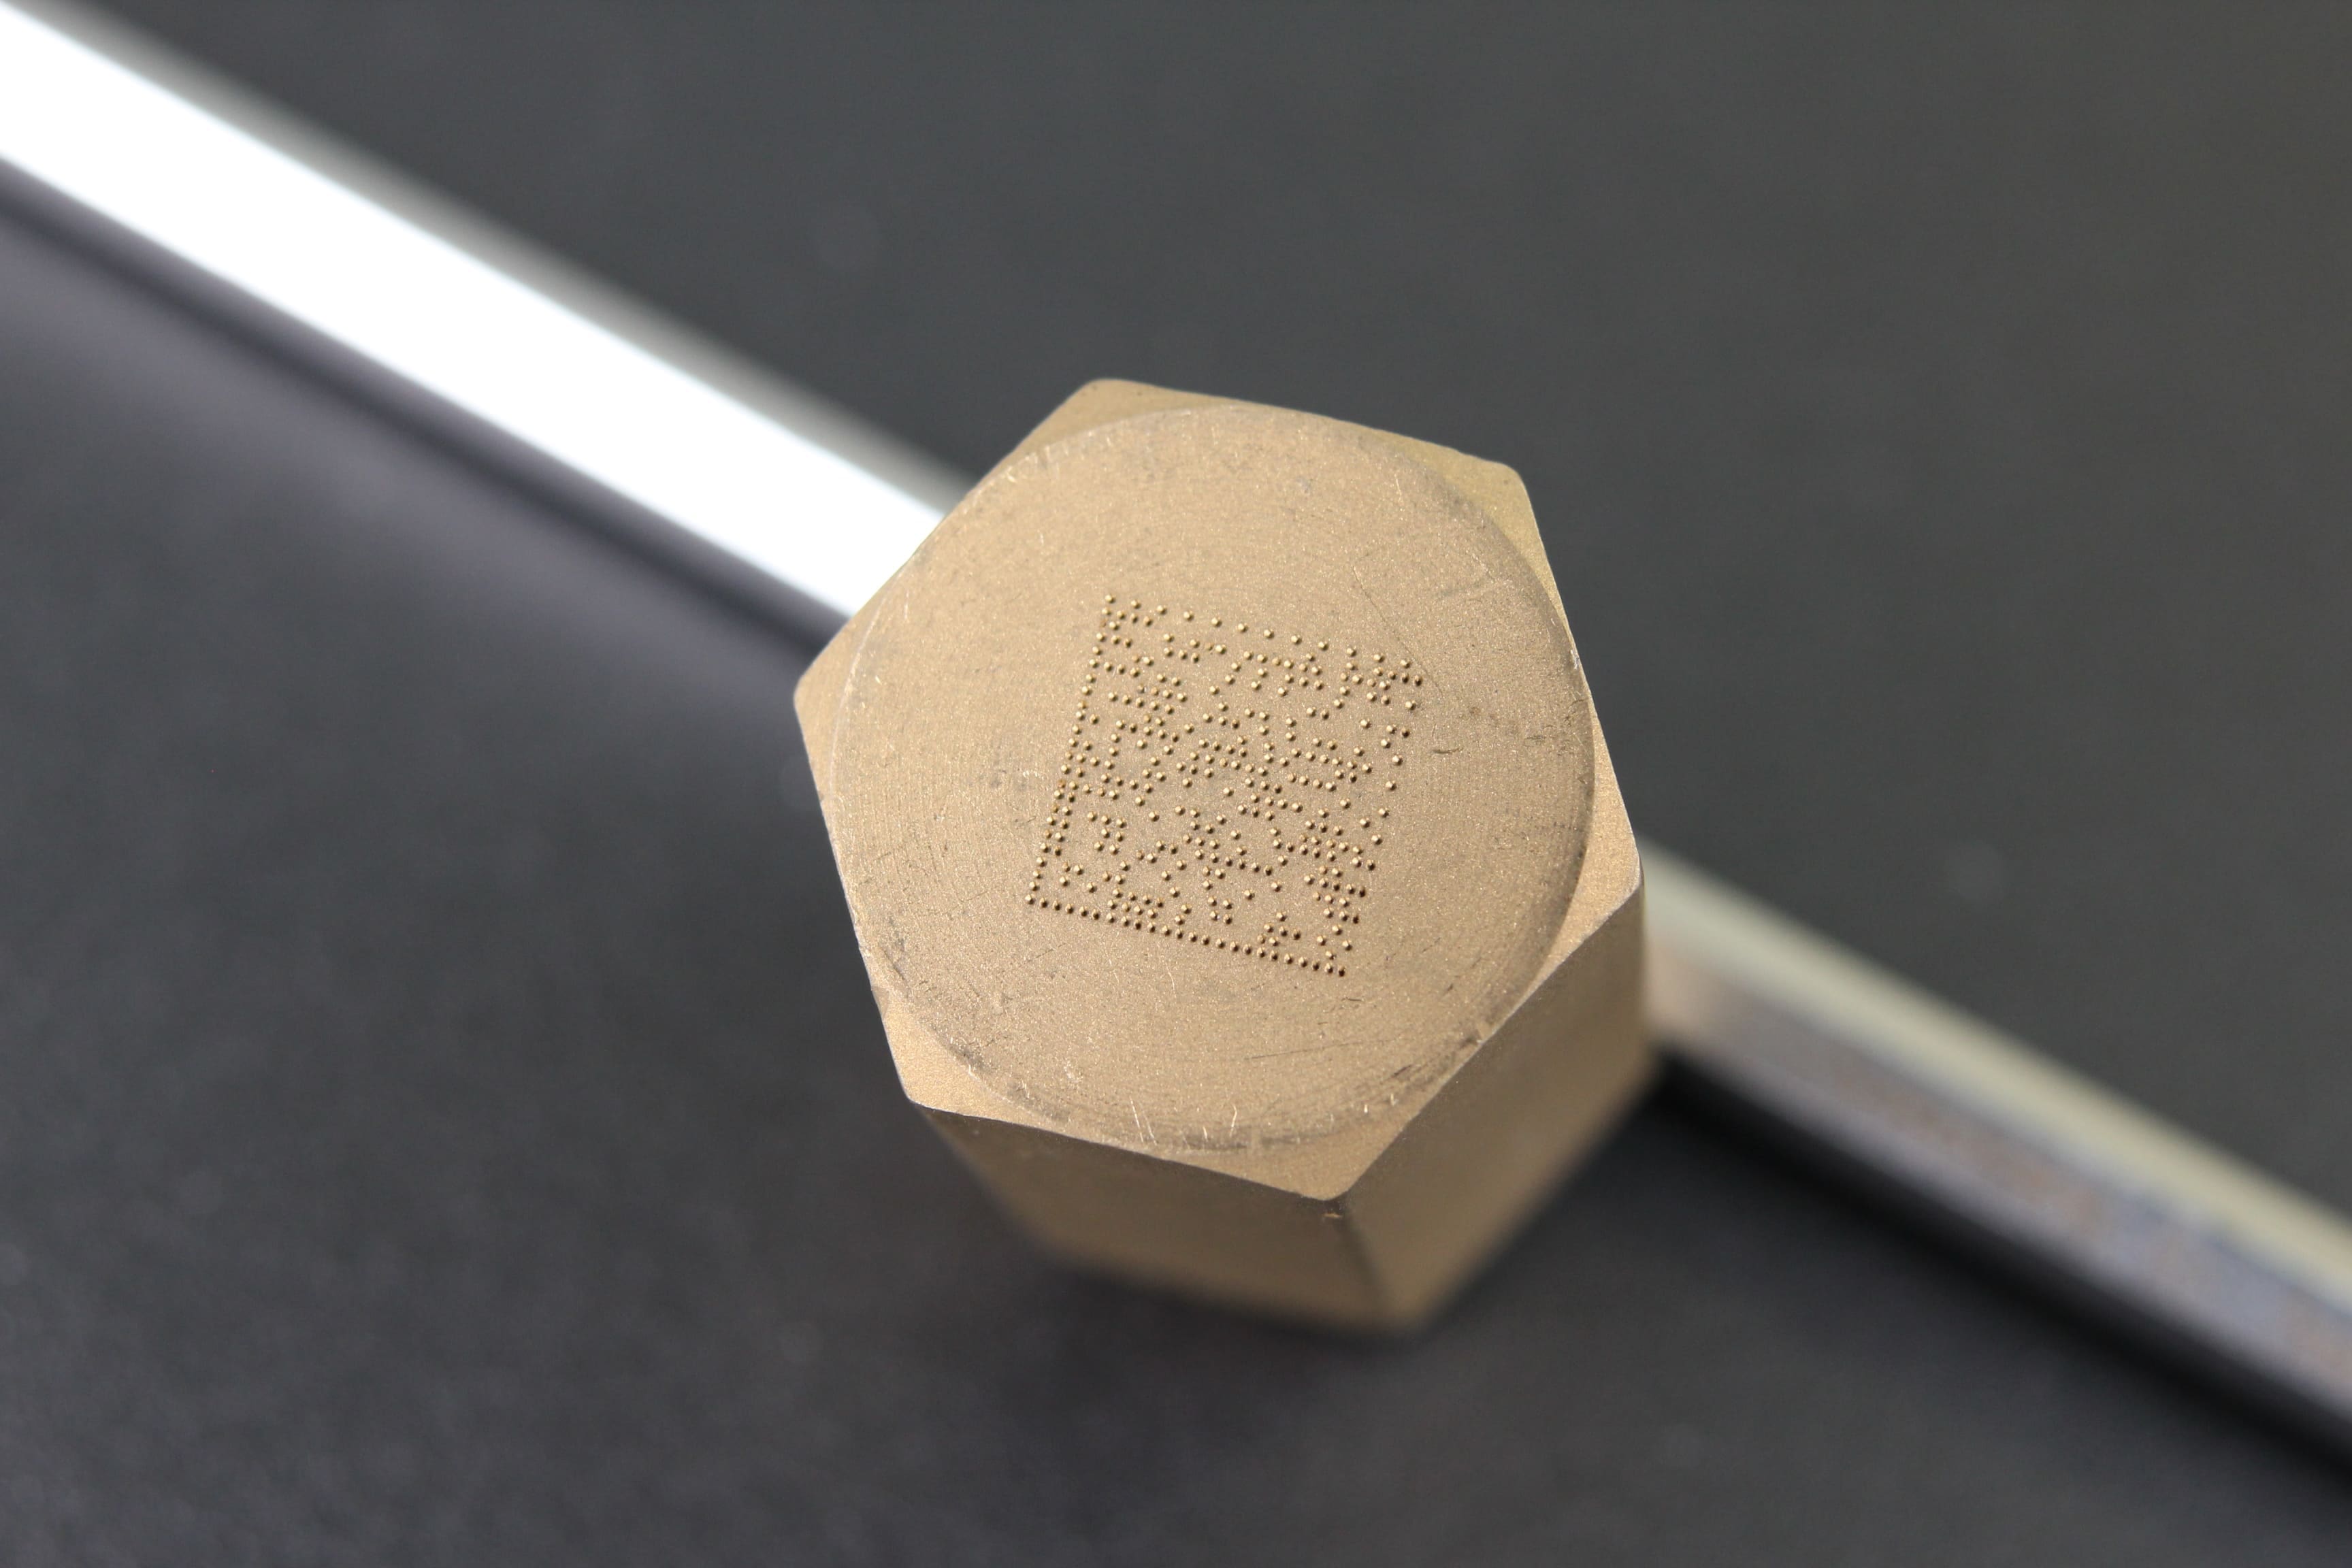 Image of brass material engraved with QR code